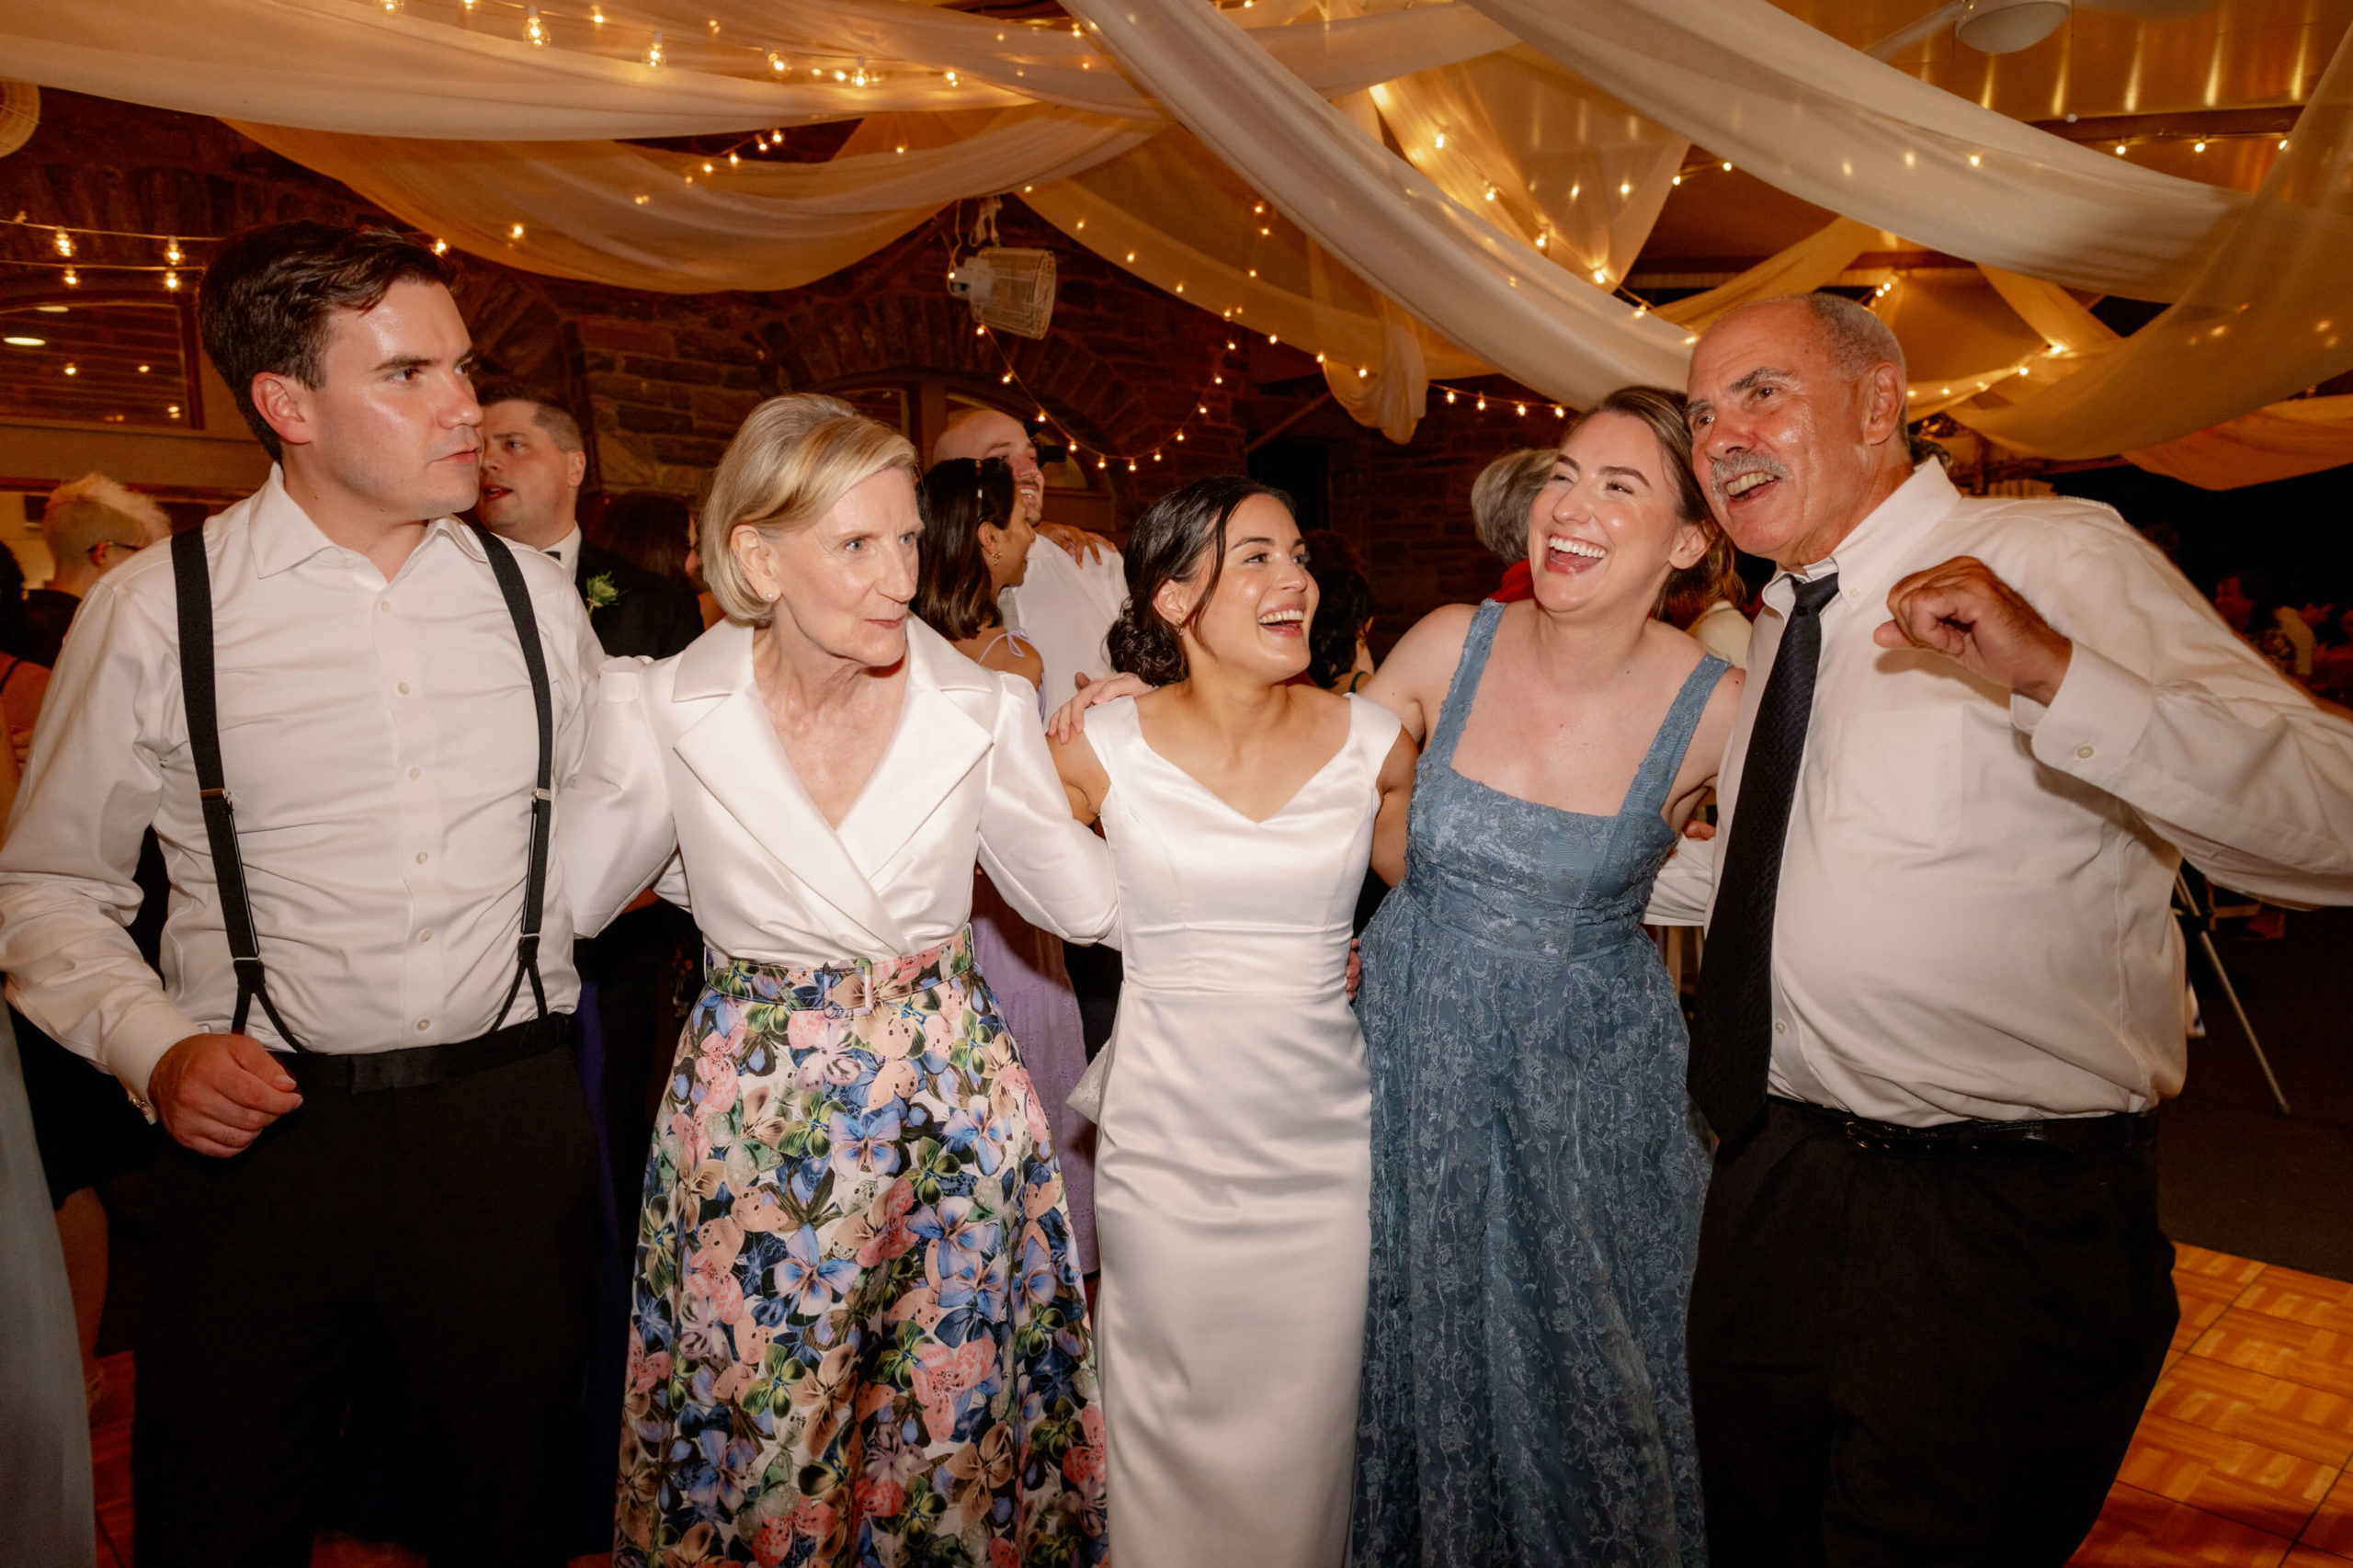 The bride, groom, and guests are happily dancing the night away. Destination wedding image by Jenny Fu Studio